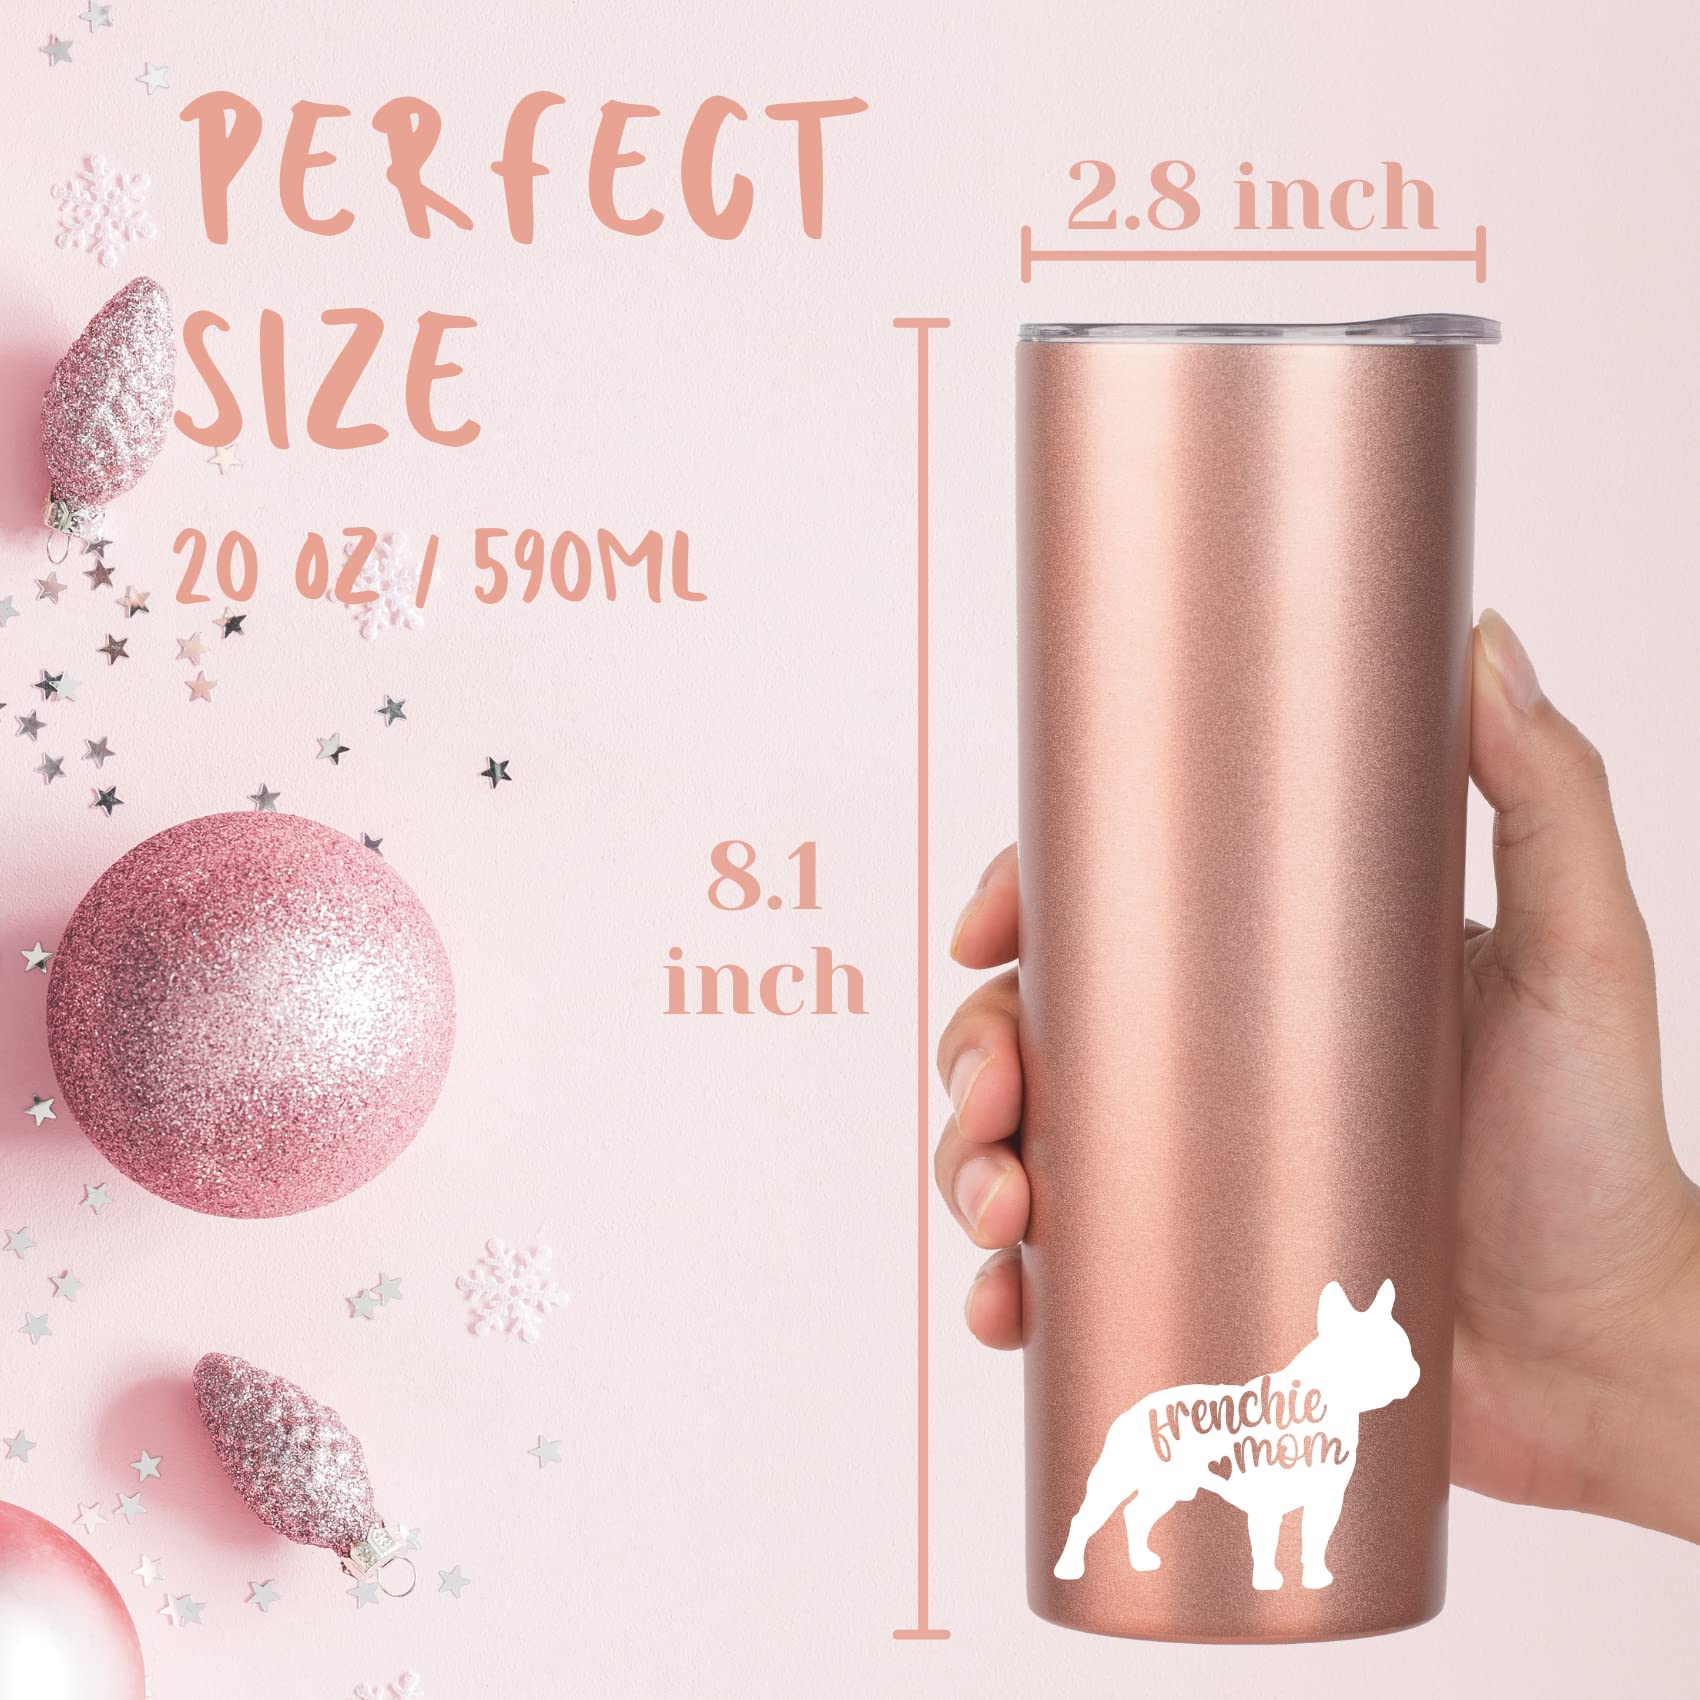 Onebttl French Bulldog Gifts for Women, Best Frenchie Mom Gifts for Birthday, Unique Dog Mom Gifts for Frenchie Mama, Rose Gold Stainless Steel Insulated Tumbler 20 oz - Frenchie Mom